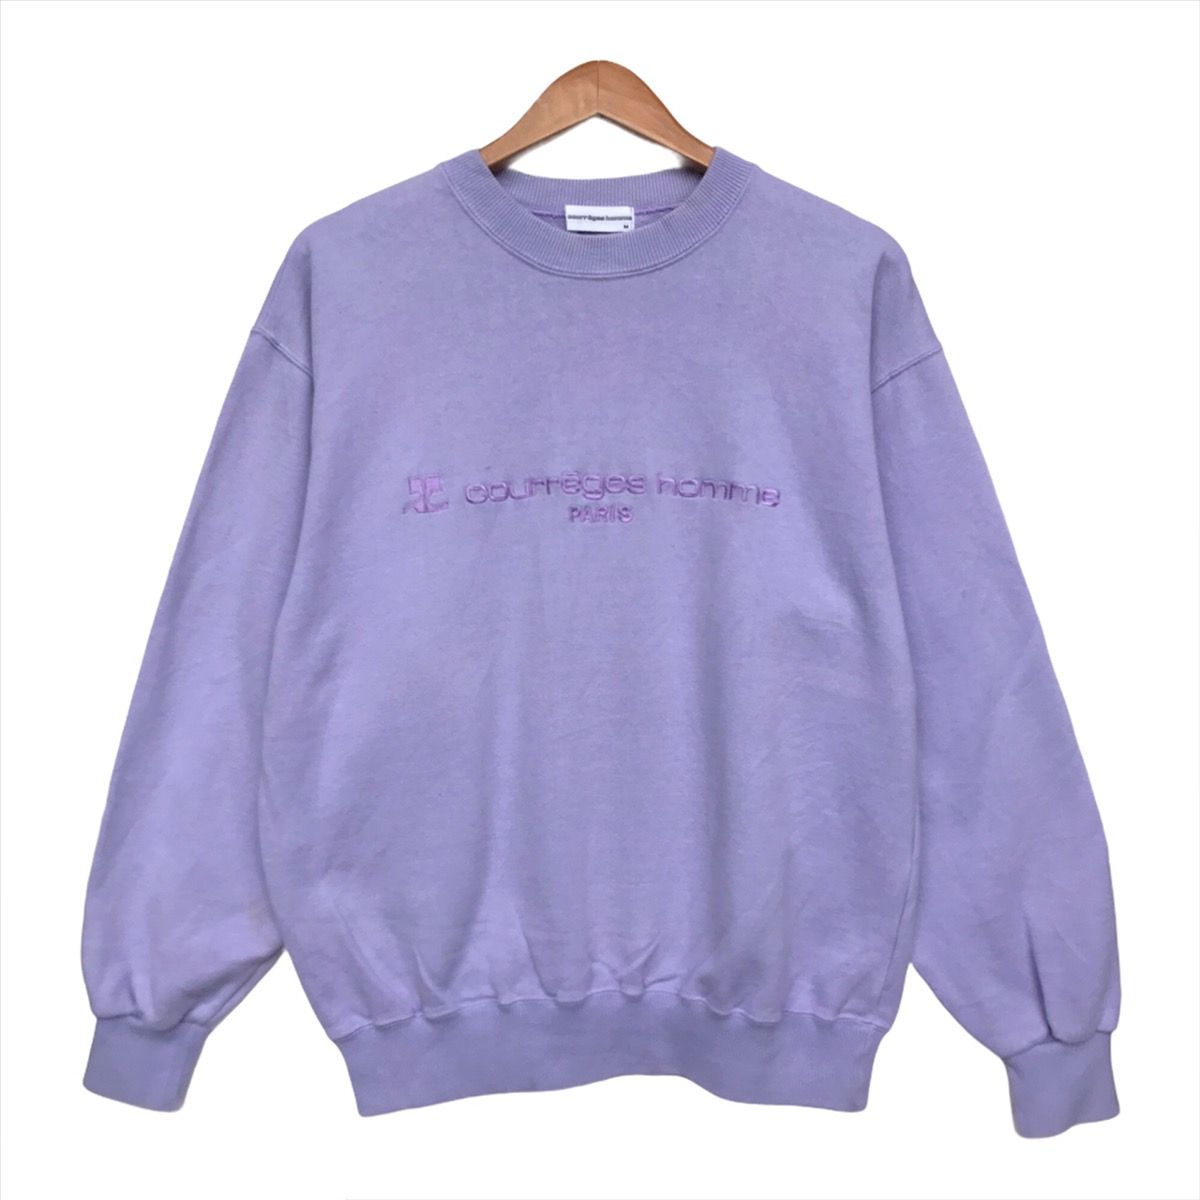 Japanese Brand - Courreages Spellout Embroidered Lilac Sweatshirt - 1